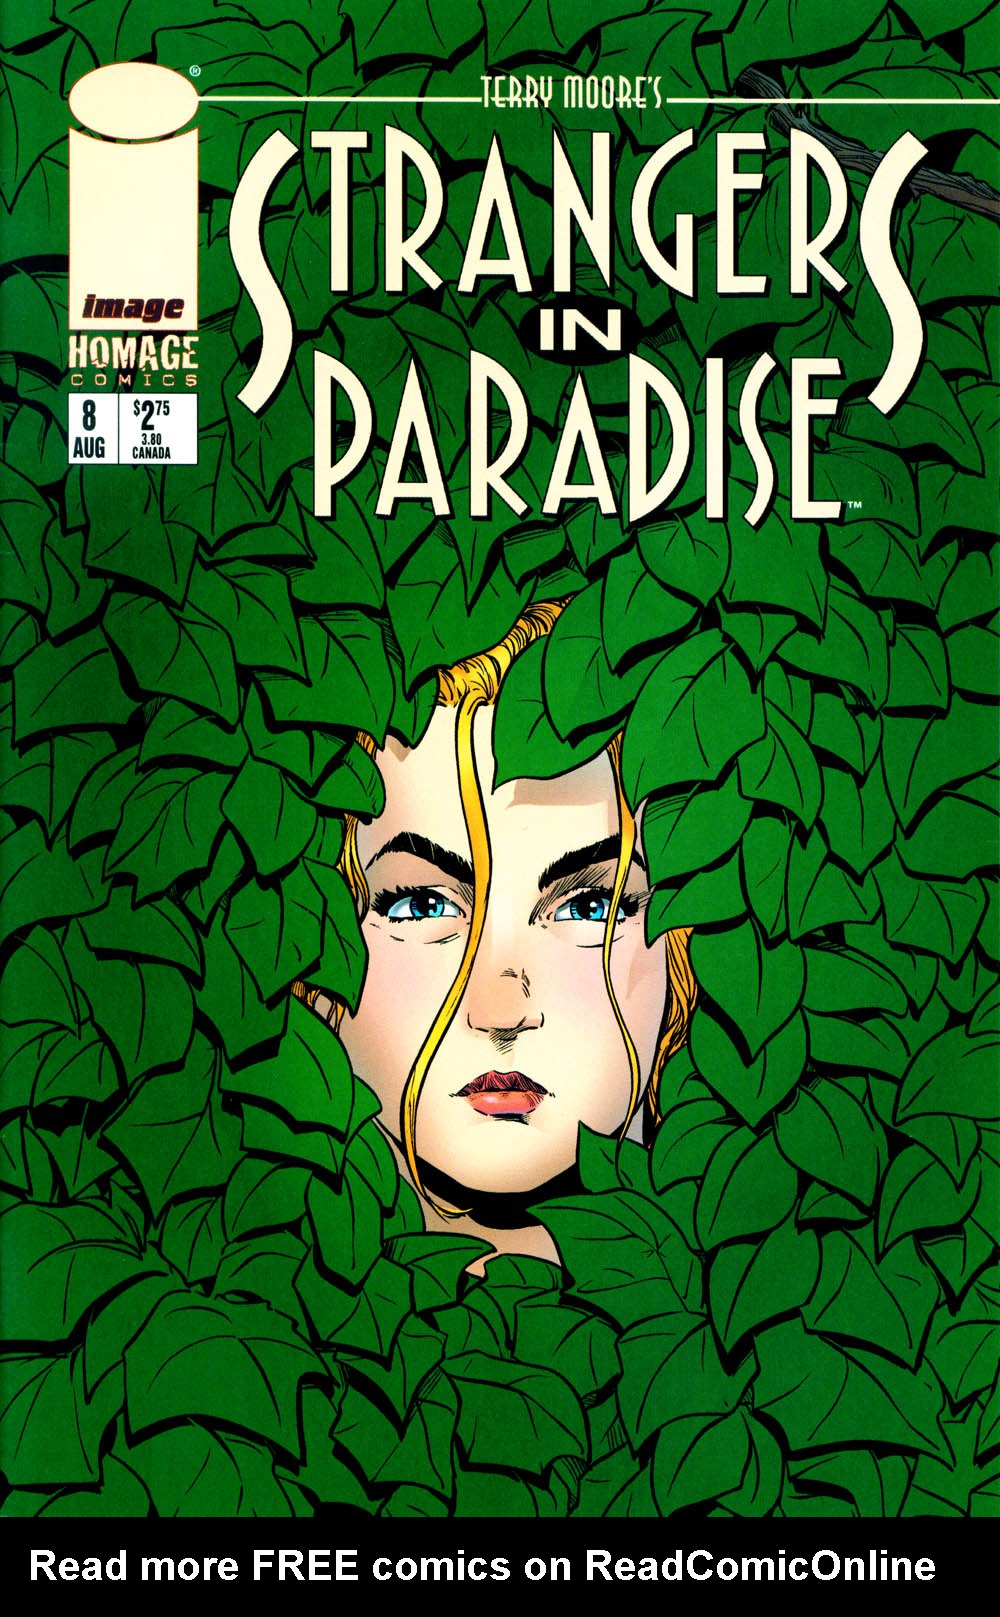 Read online Strangers in Paradise comic -  Issue #8 - 3